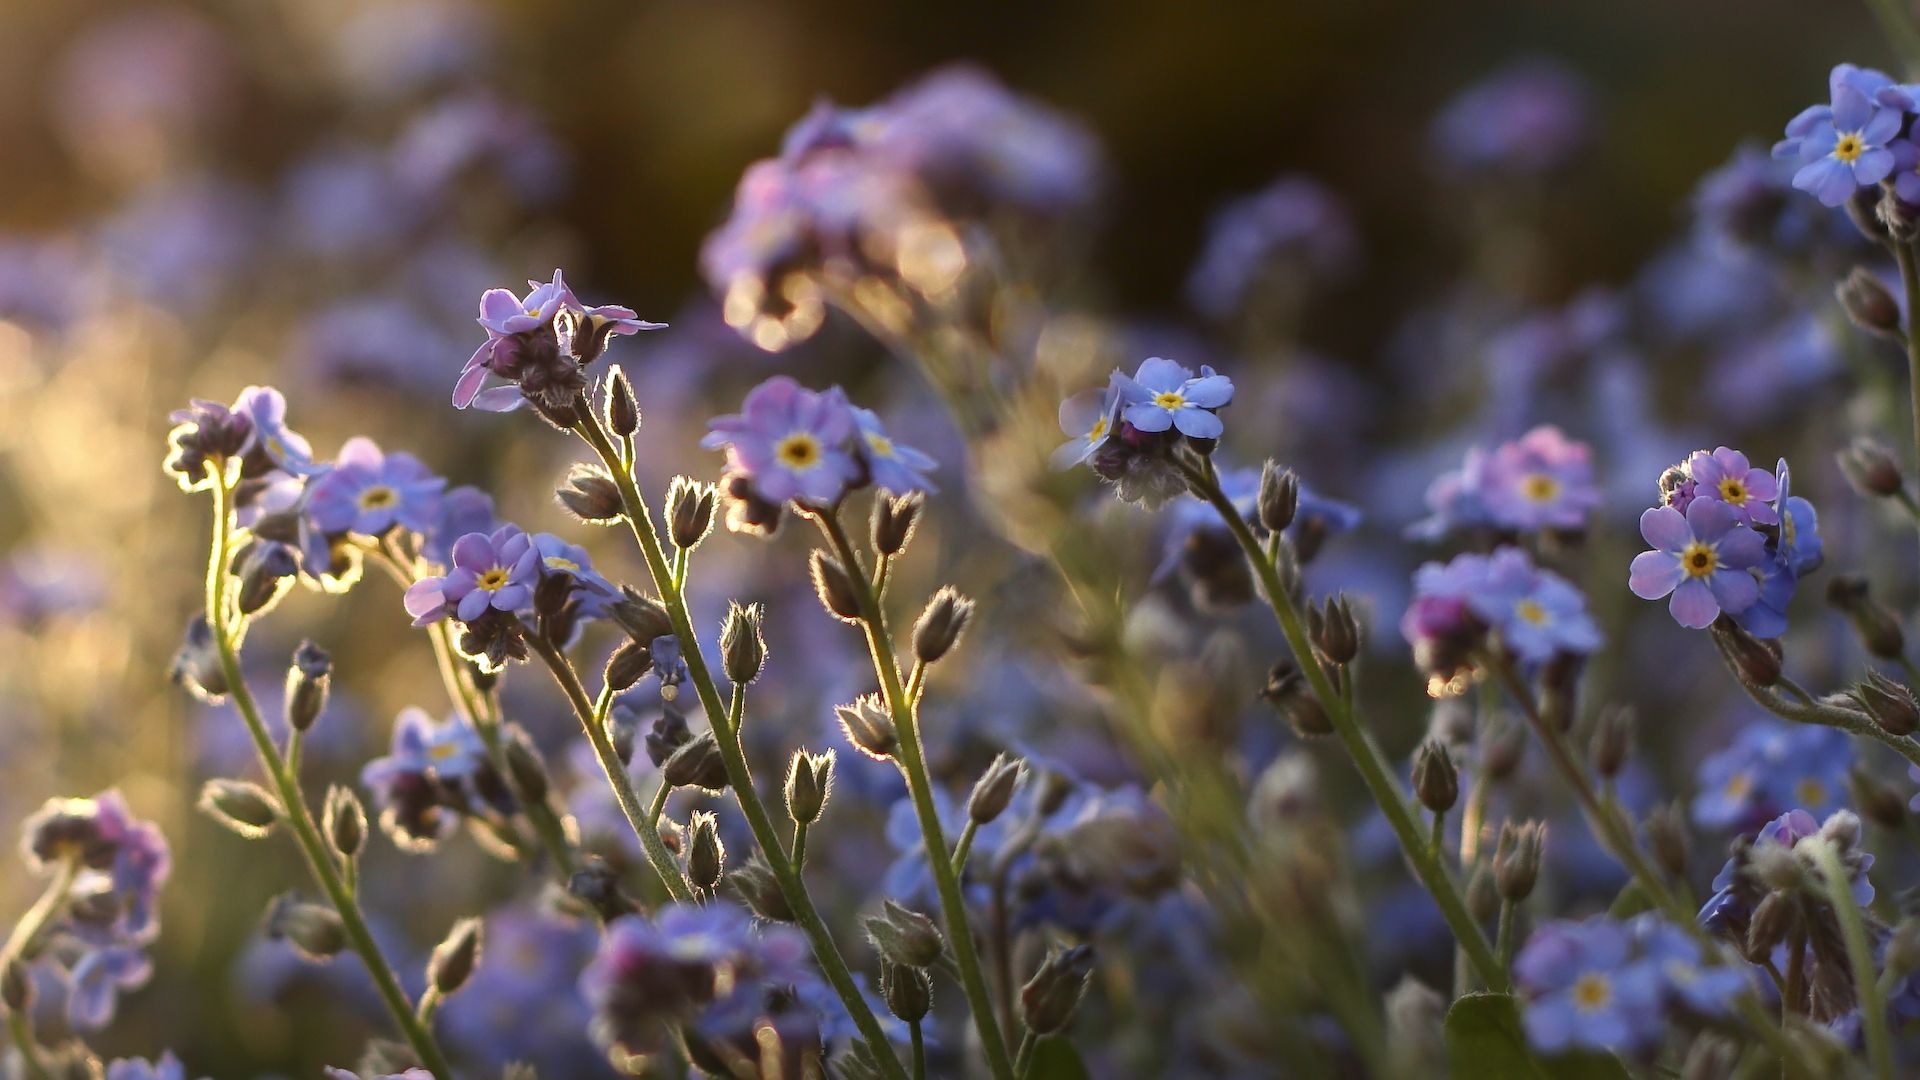 A field of forget-me-nots bathed in golden sunlight. - Macro